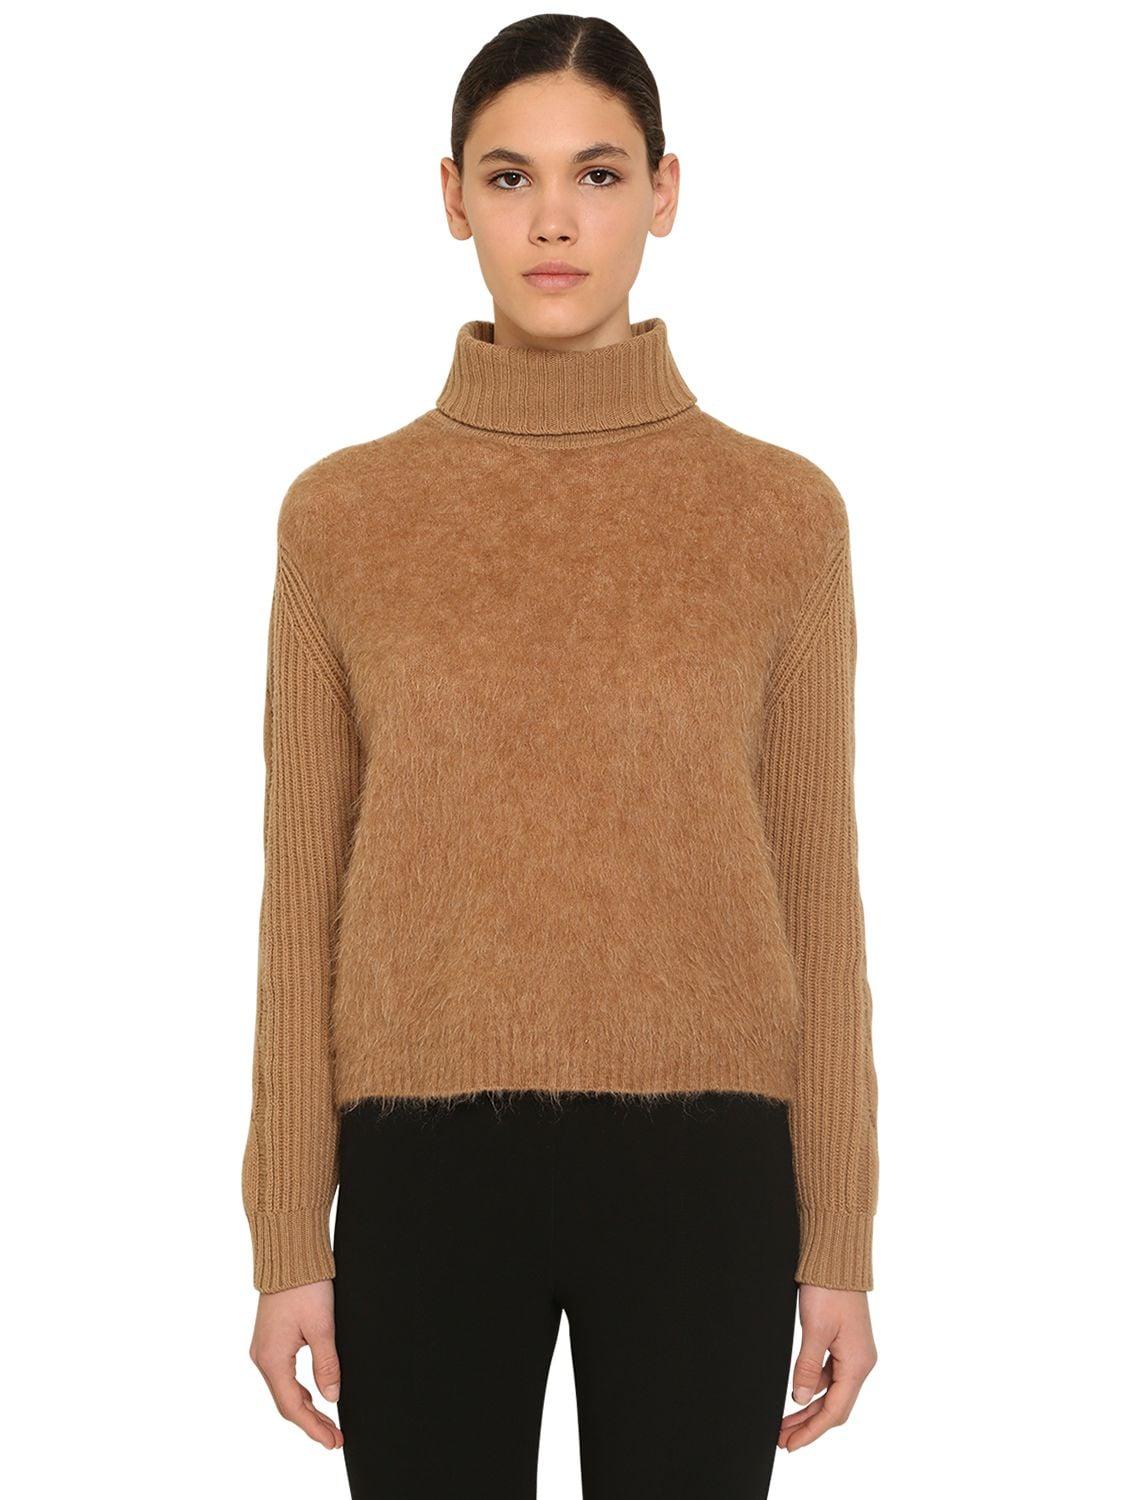 Max Mara Wool Mohair Blend Knit Sweater in Camel (Natural) - Lyst